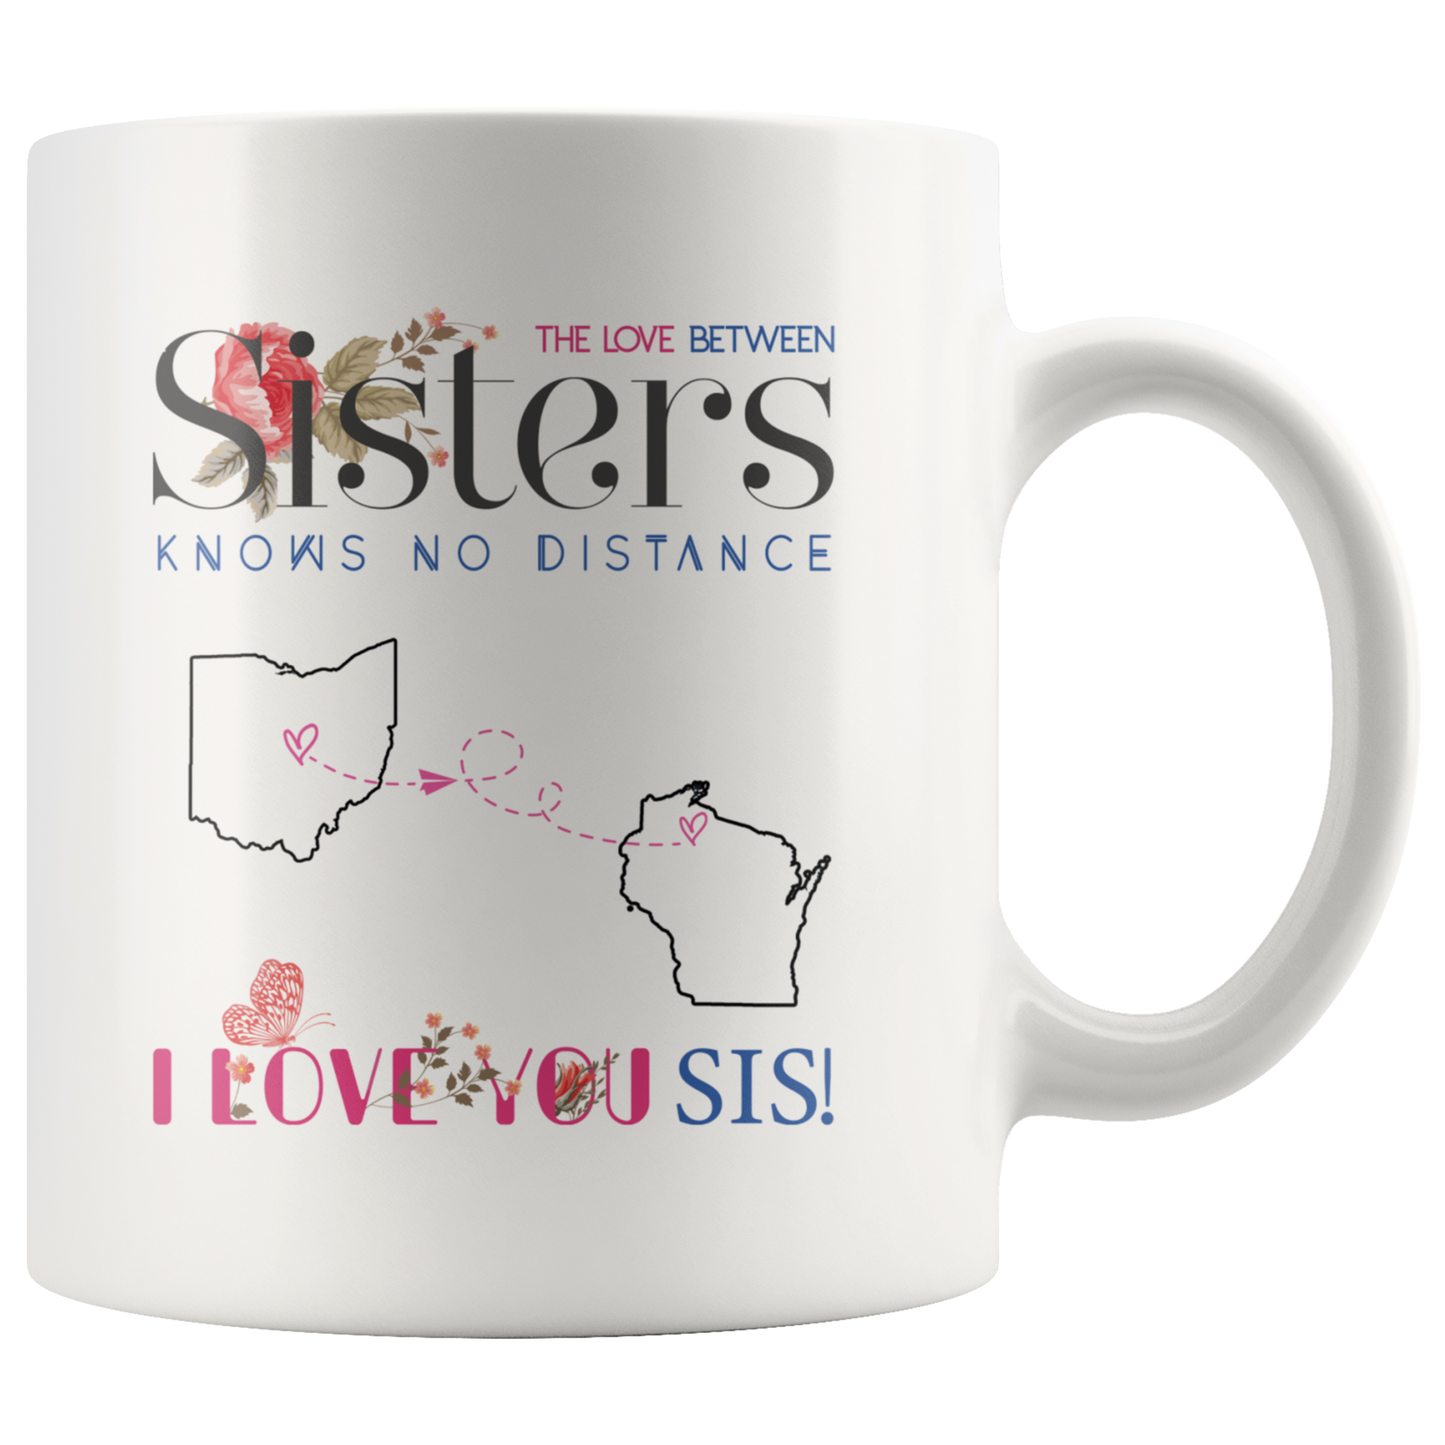 M-20520002-sp-22786 - Long Distance Relationship Gift - The Love Between Sisters K